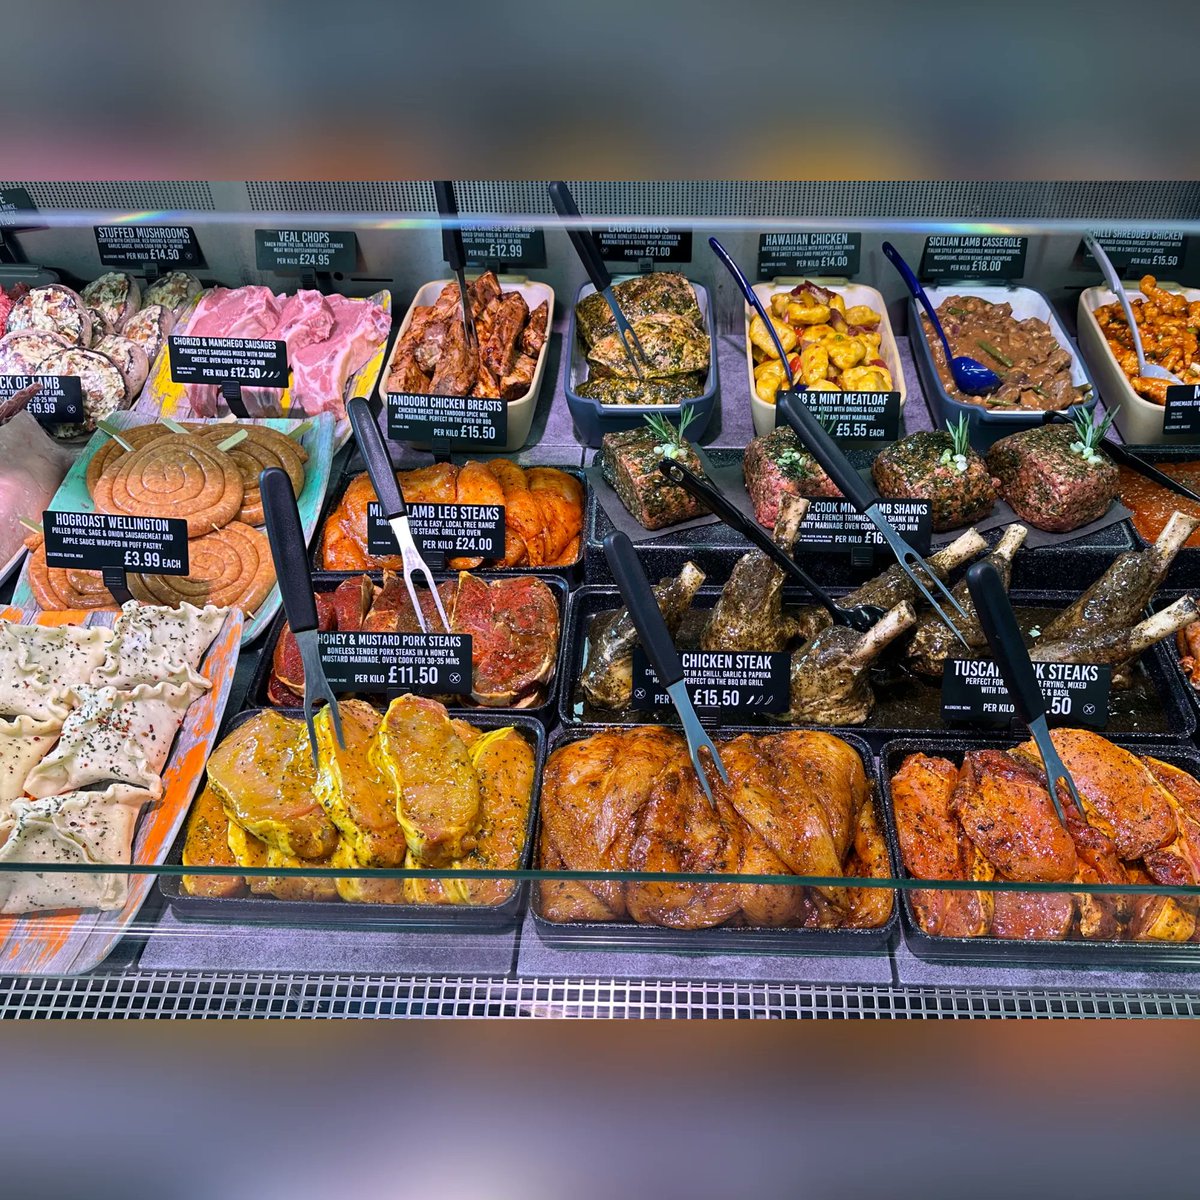 Fully stocked & ready for the weekend! #FreshCuts #QualityMeats #VarietyIsKey #FarmToFork #LocallySourced #ButcherShop #PremiumMeats #MouthwateringSelection #MeatLoversParadise #CookingInspiration #haywards1990